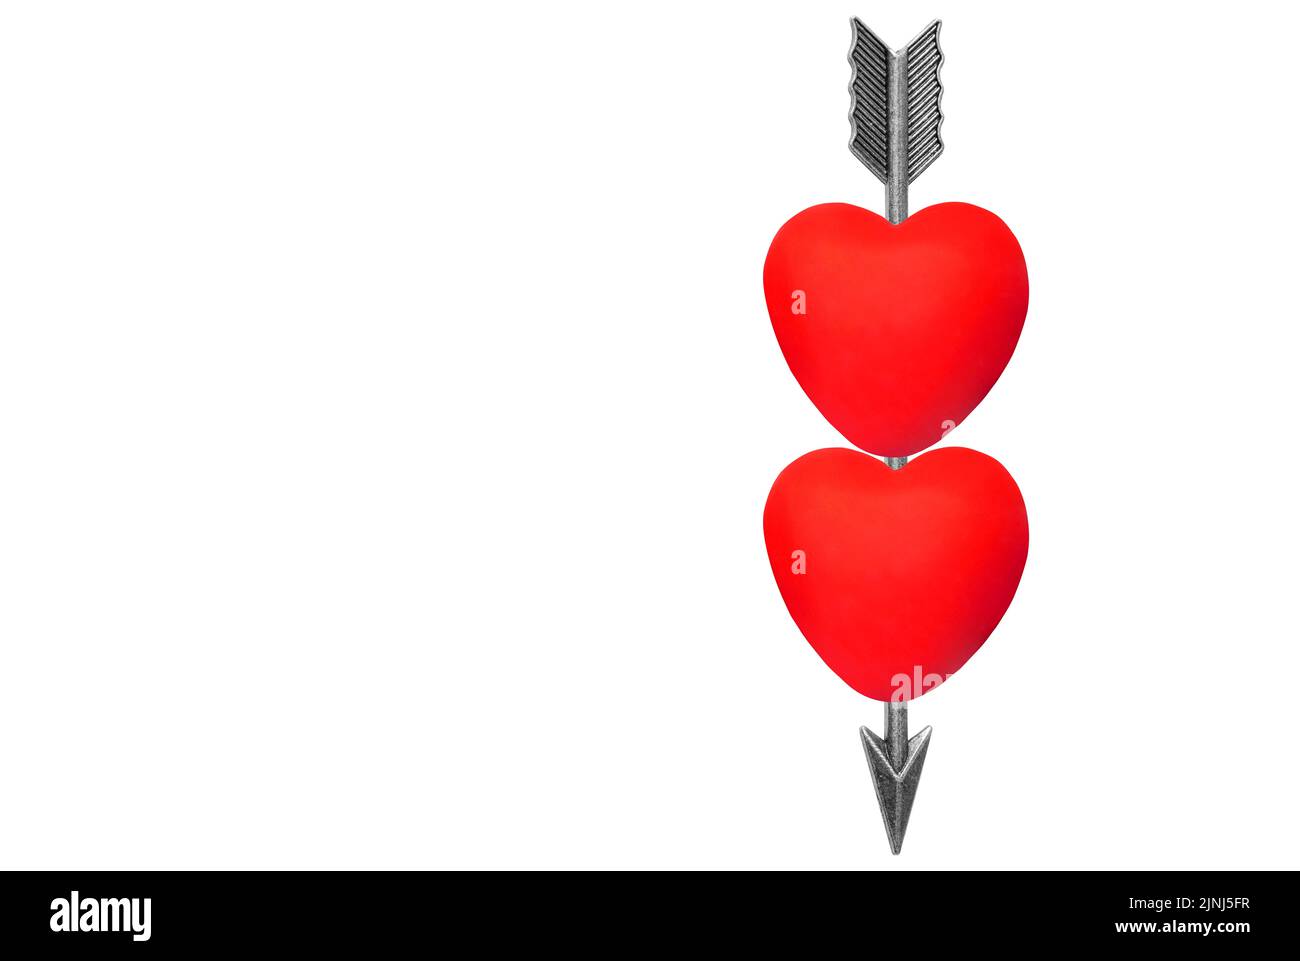 Feathered bow arrow running through two red hearts isolated on white background. Stock Photo